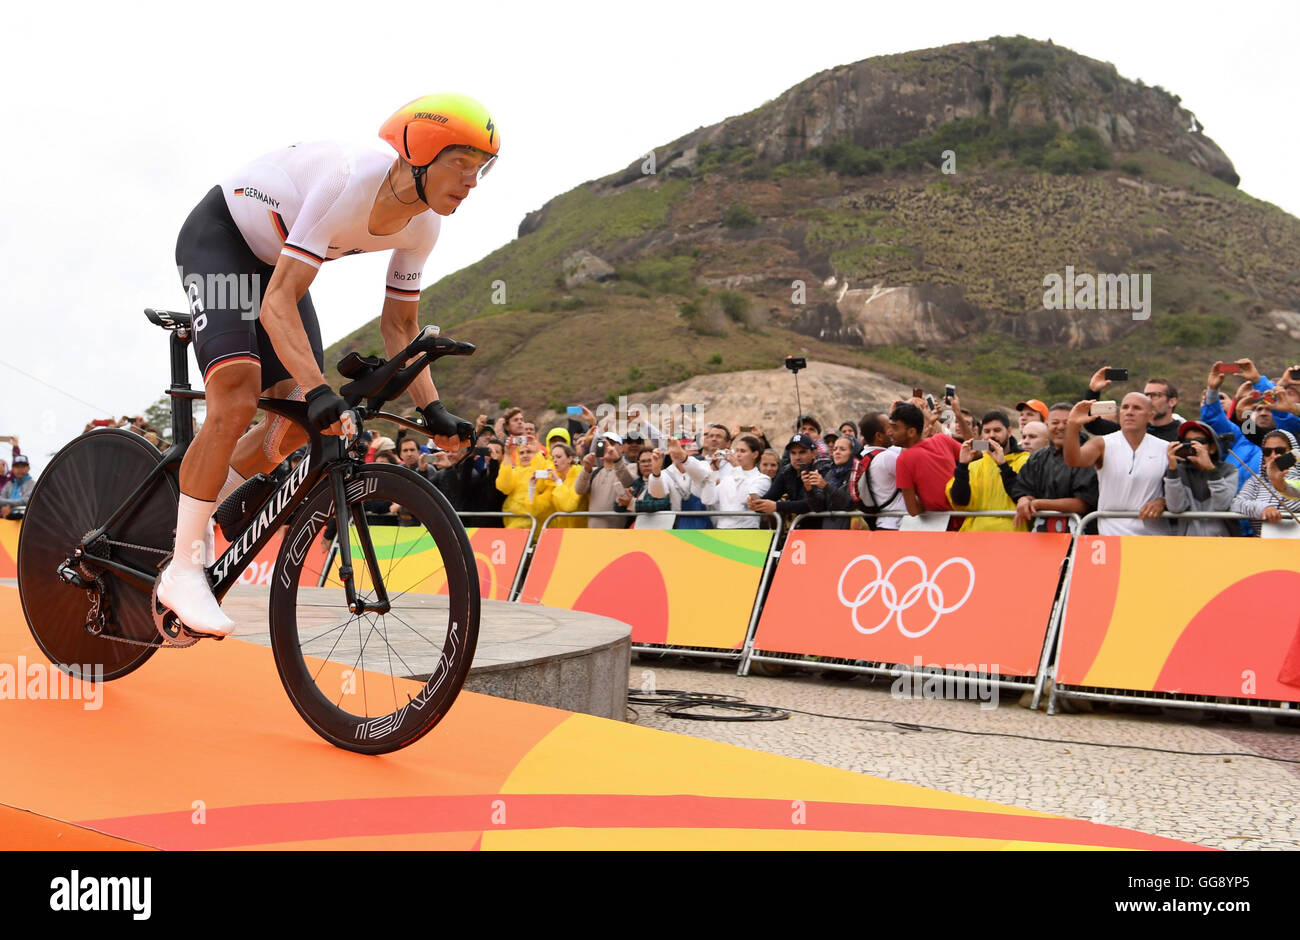 Rio de Janeiro, Brazil. 10th Aug, 2016. Tony Martin of Germany at the start of the men's Individual Time Trial of the Rio 2016 Olympic Games Road Cycling events at Pontal in Rio de Janeiro, Brazil, 10 August 2016. Photo: Sebastian Kahnert/dpa/Alamy Live News Stock Photo